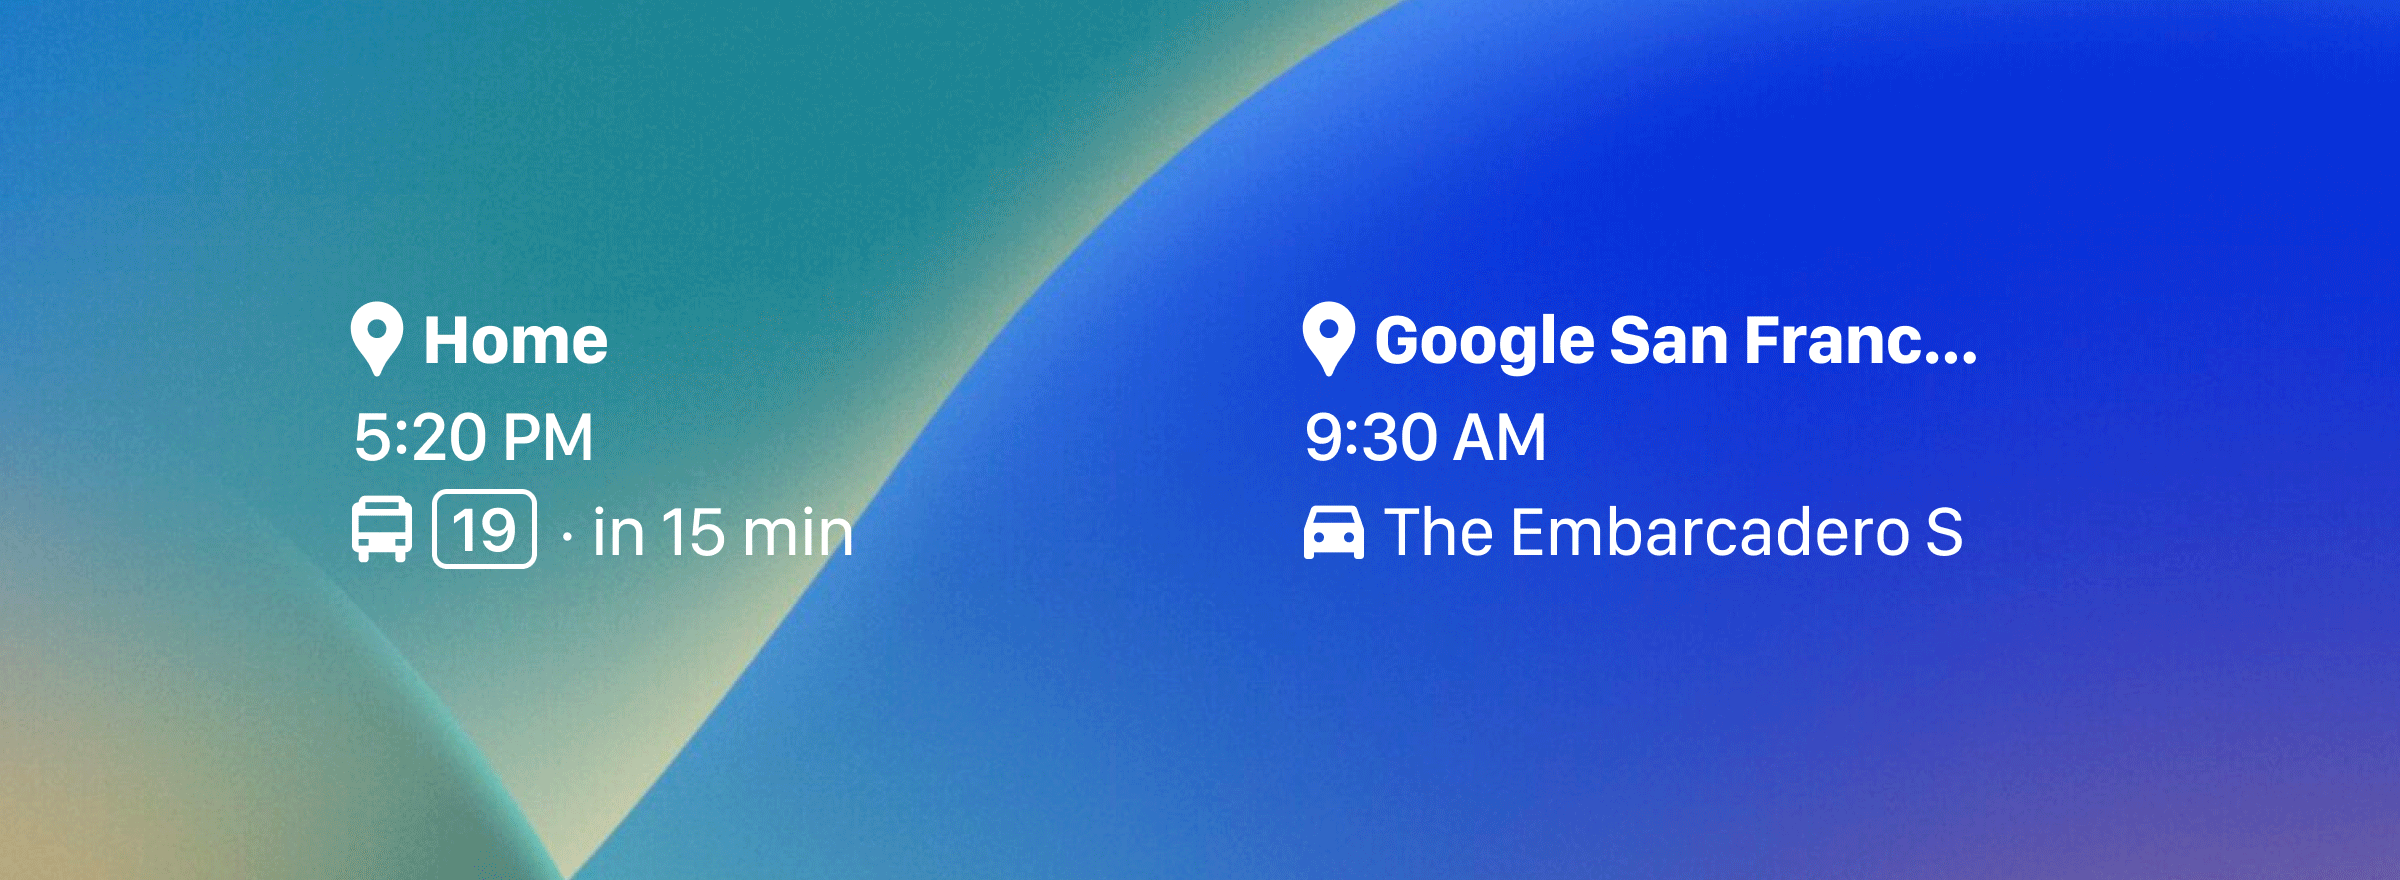 Google Maps widgets with restaurant, shopping, coffee shop, and hotel search.